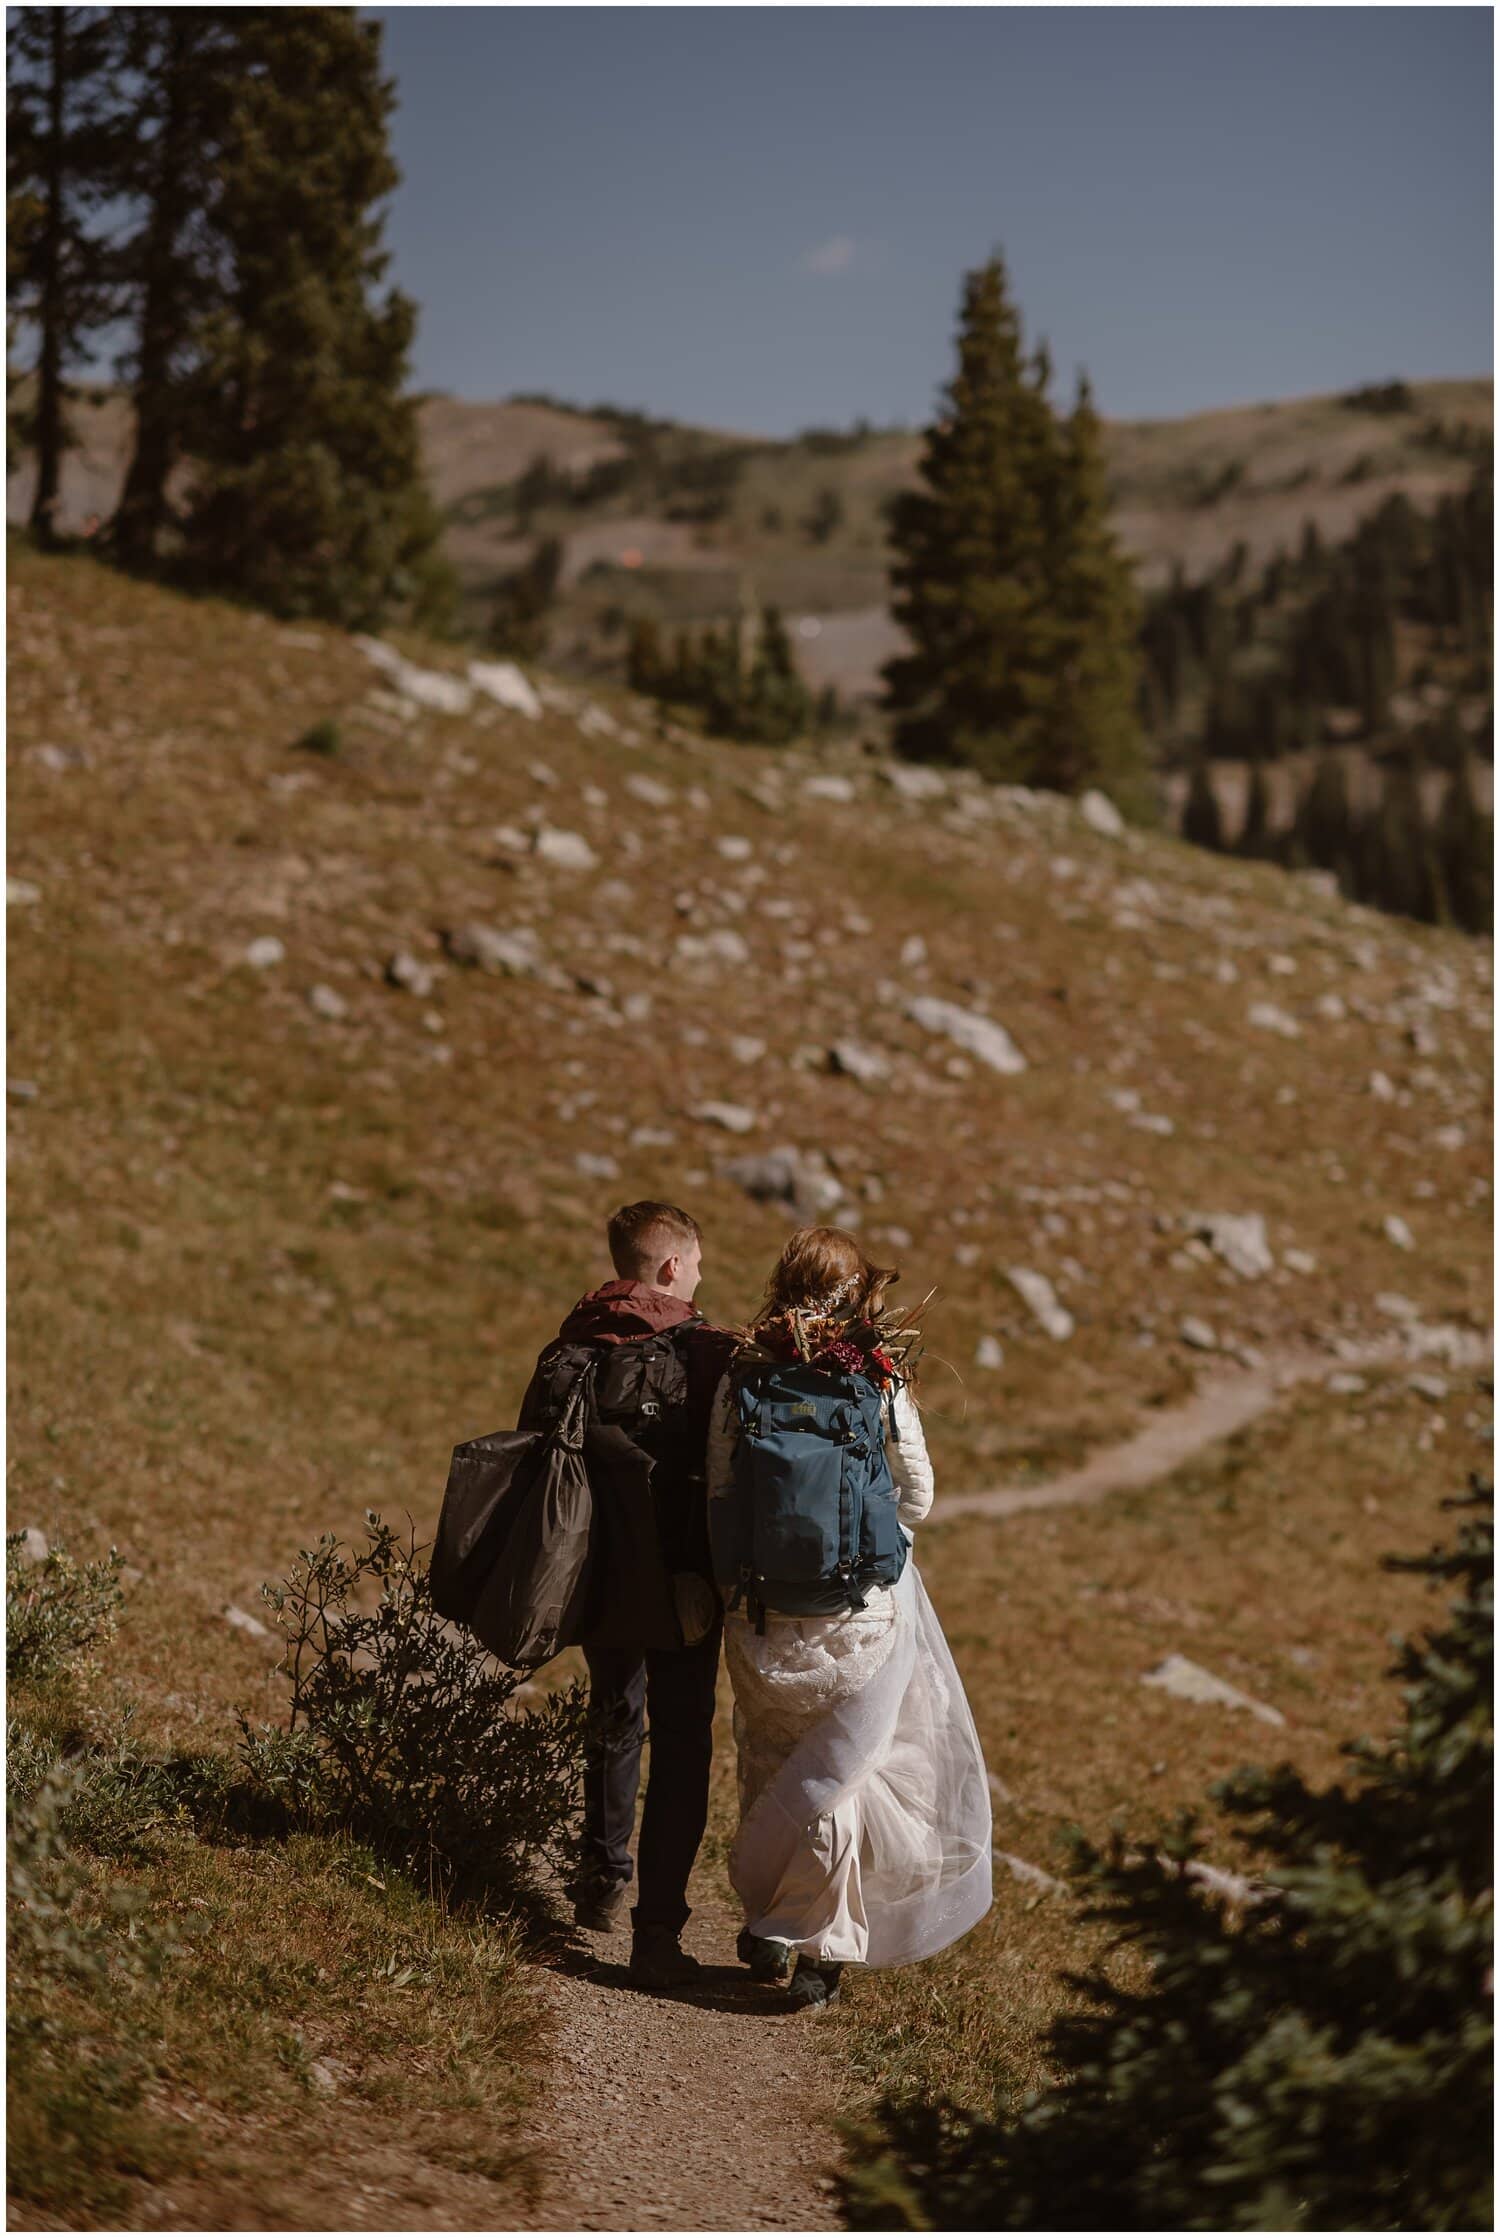 Bride and groom hiking on trail in Buena Vista, Colorado. Mountains and trees in background. 